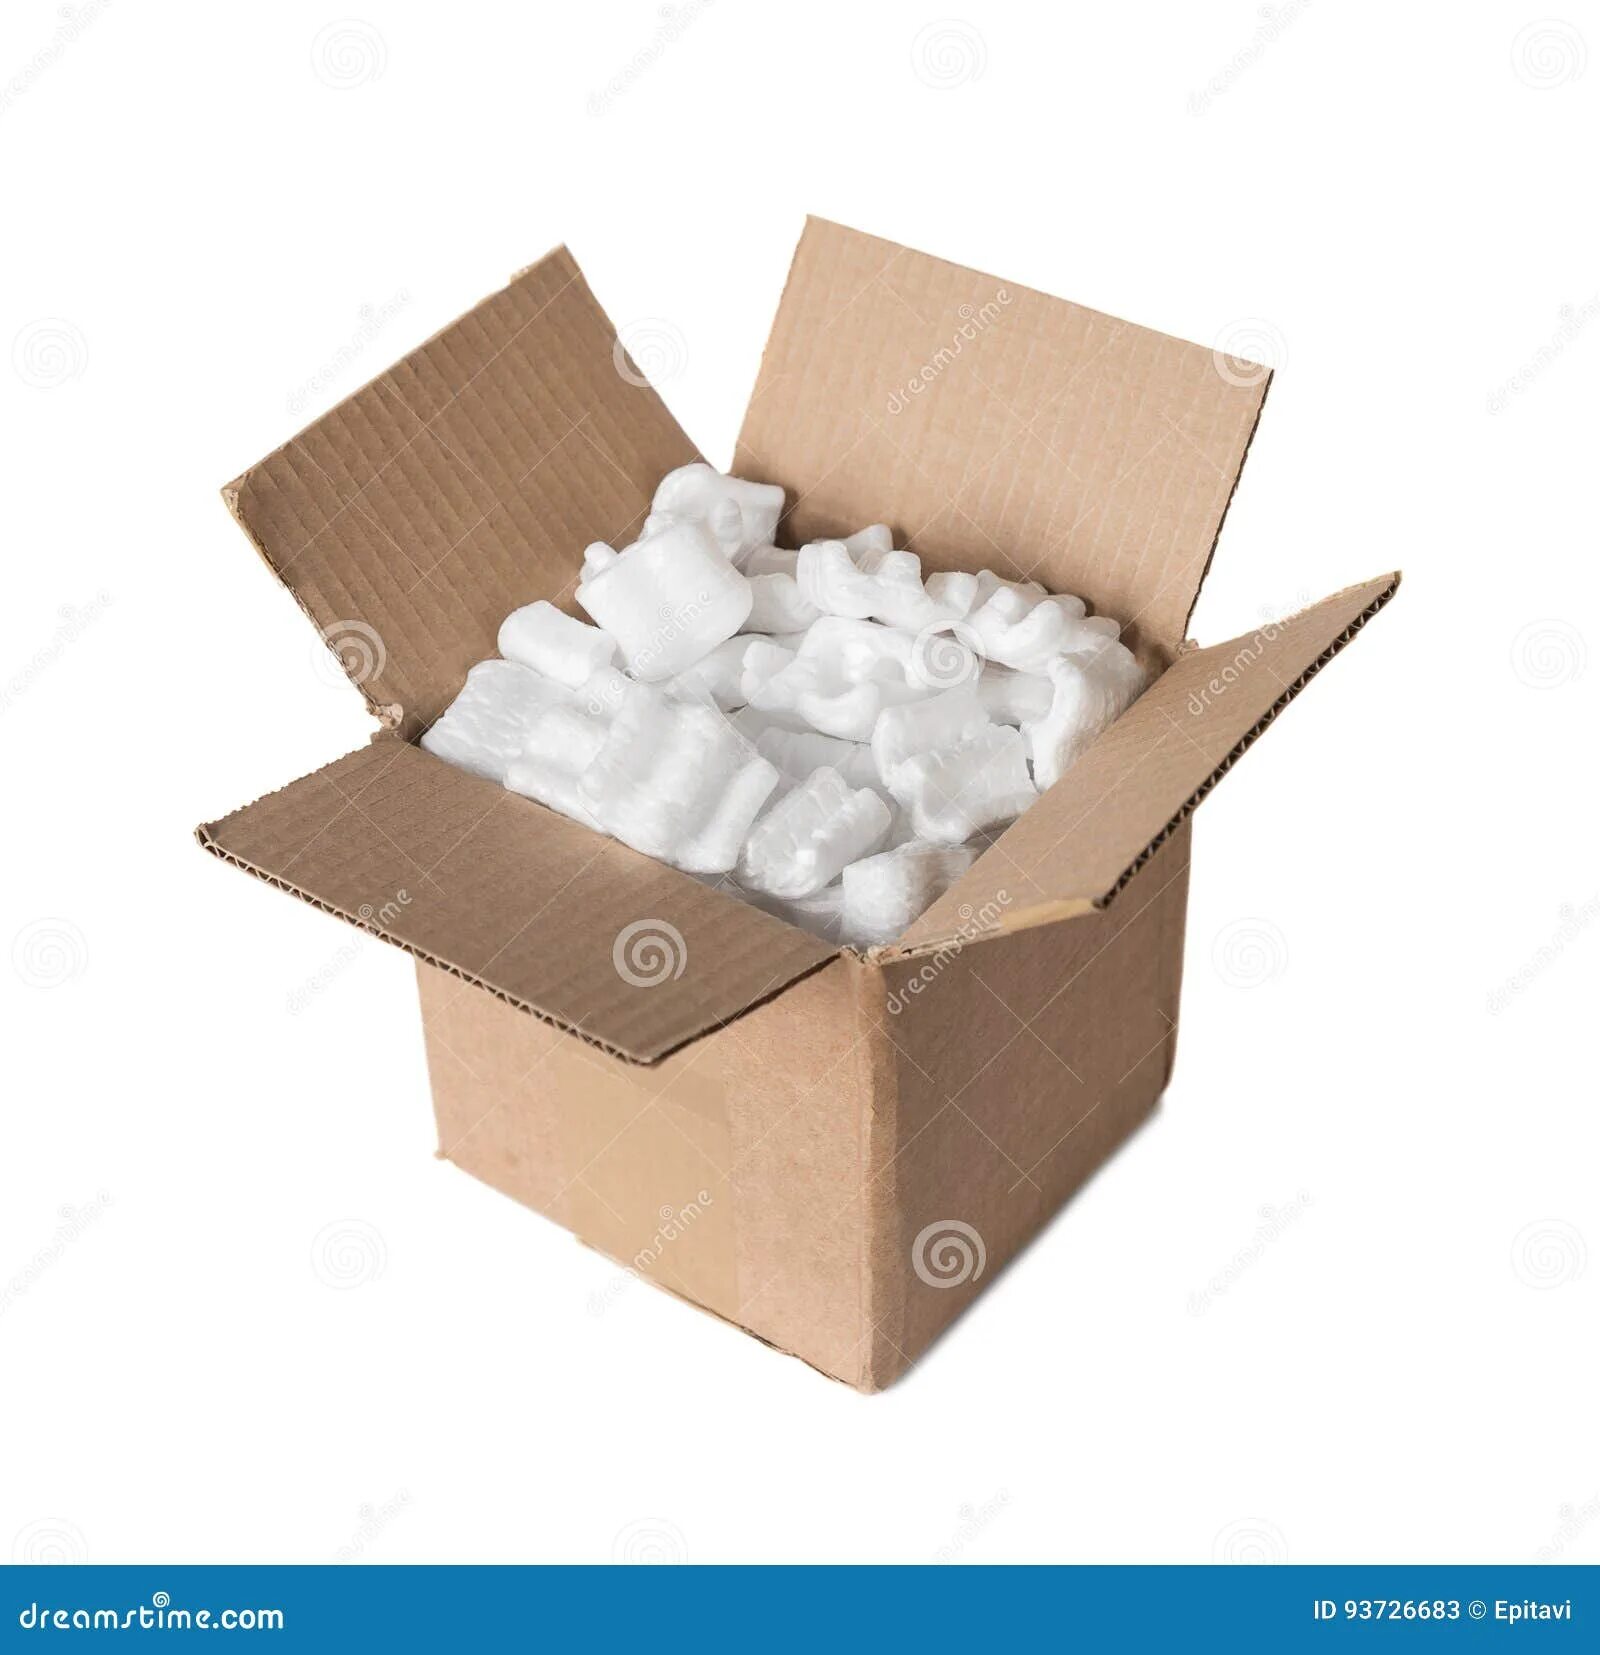 Fill the Boxes. Polystyrene Chips. Packing Box Fillers. Foam Chips.